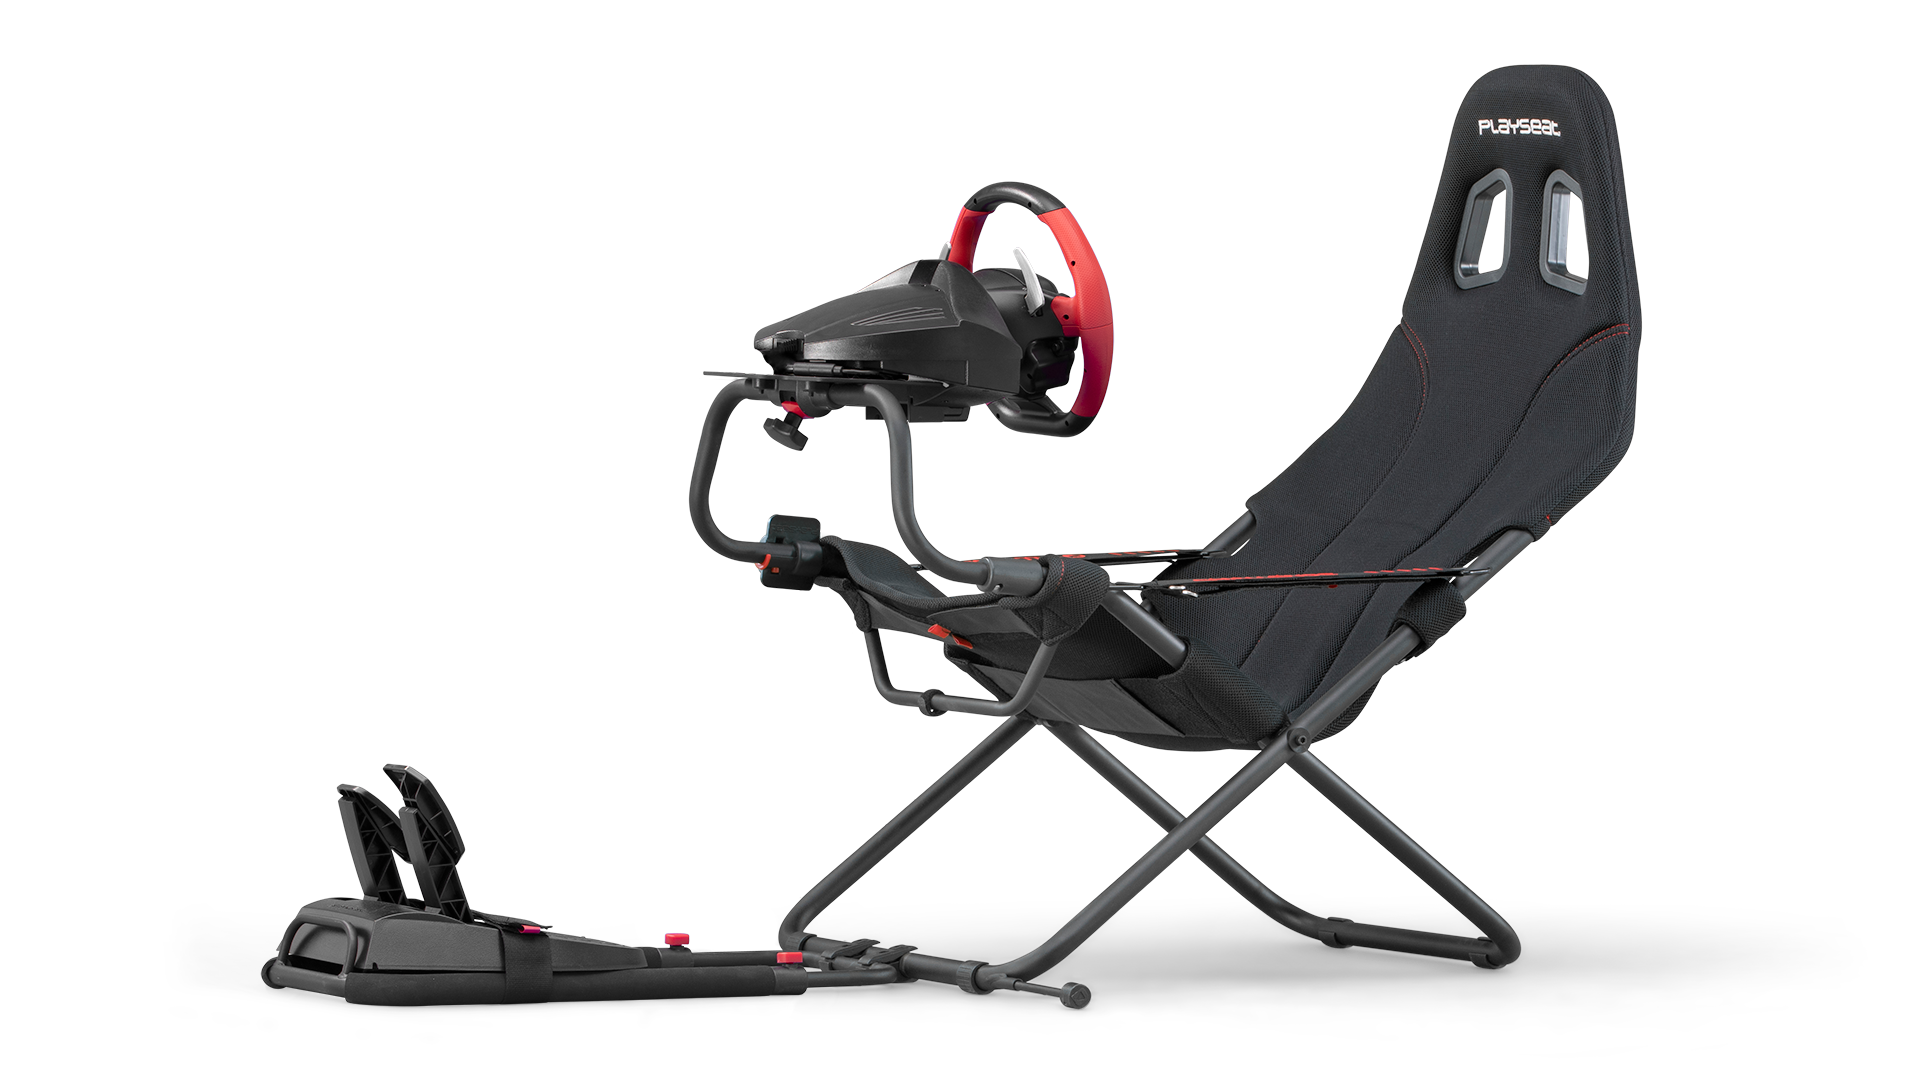 Playseat Challenge review: A superb starter racing seat for gamers